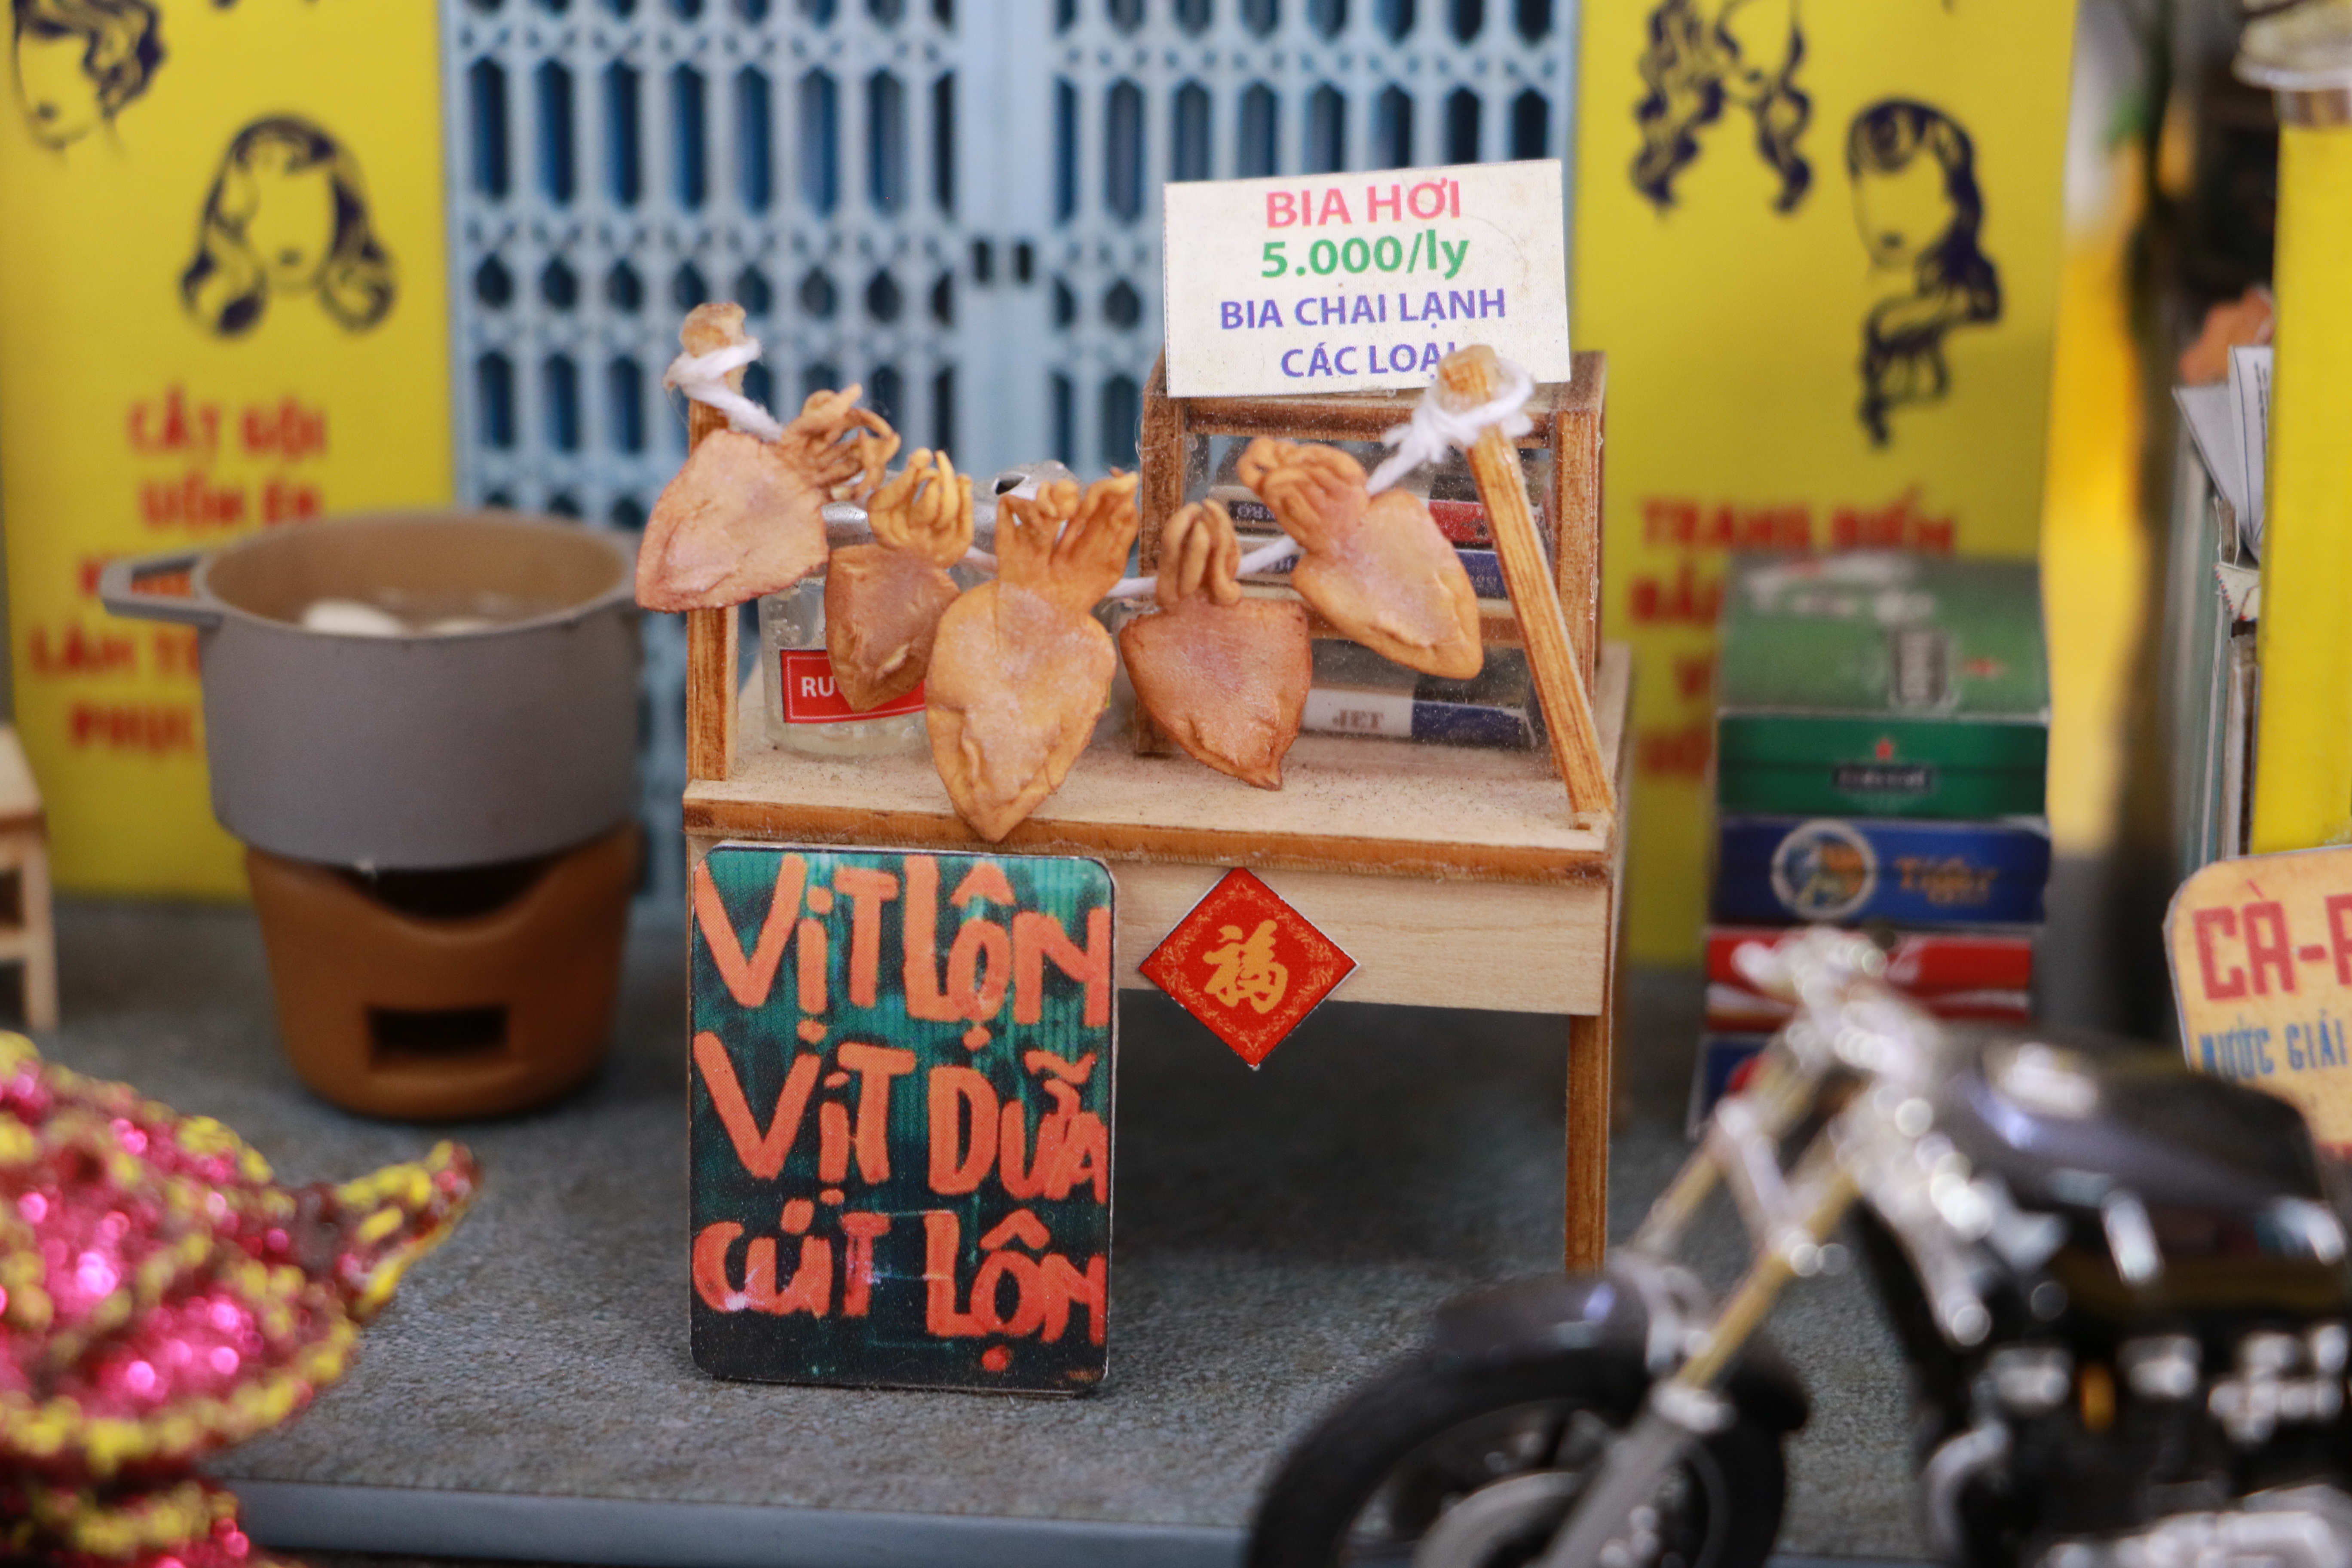 A miniature by The Gioi Ti Hon featuring a sidewalk stall selling baluts and dried squids. Photo: Binh Minh/Tuoi Tre